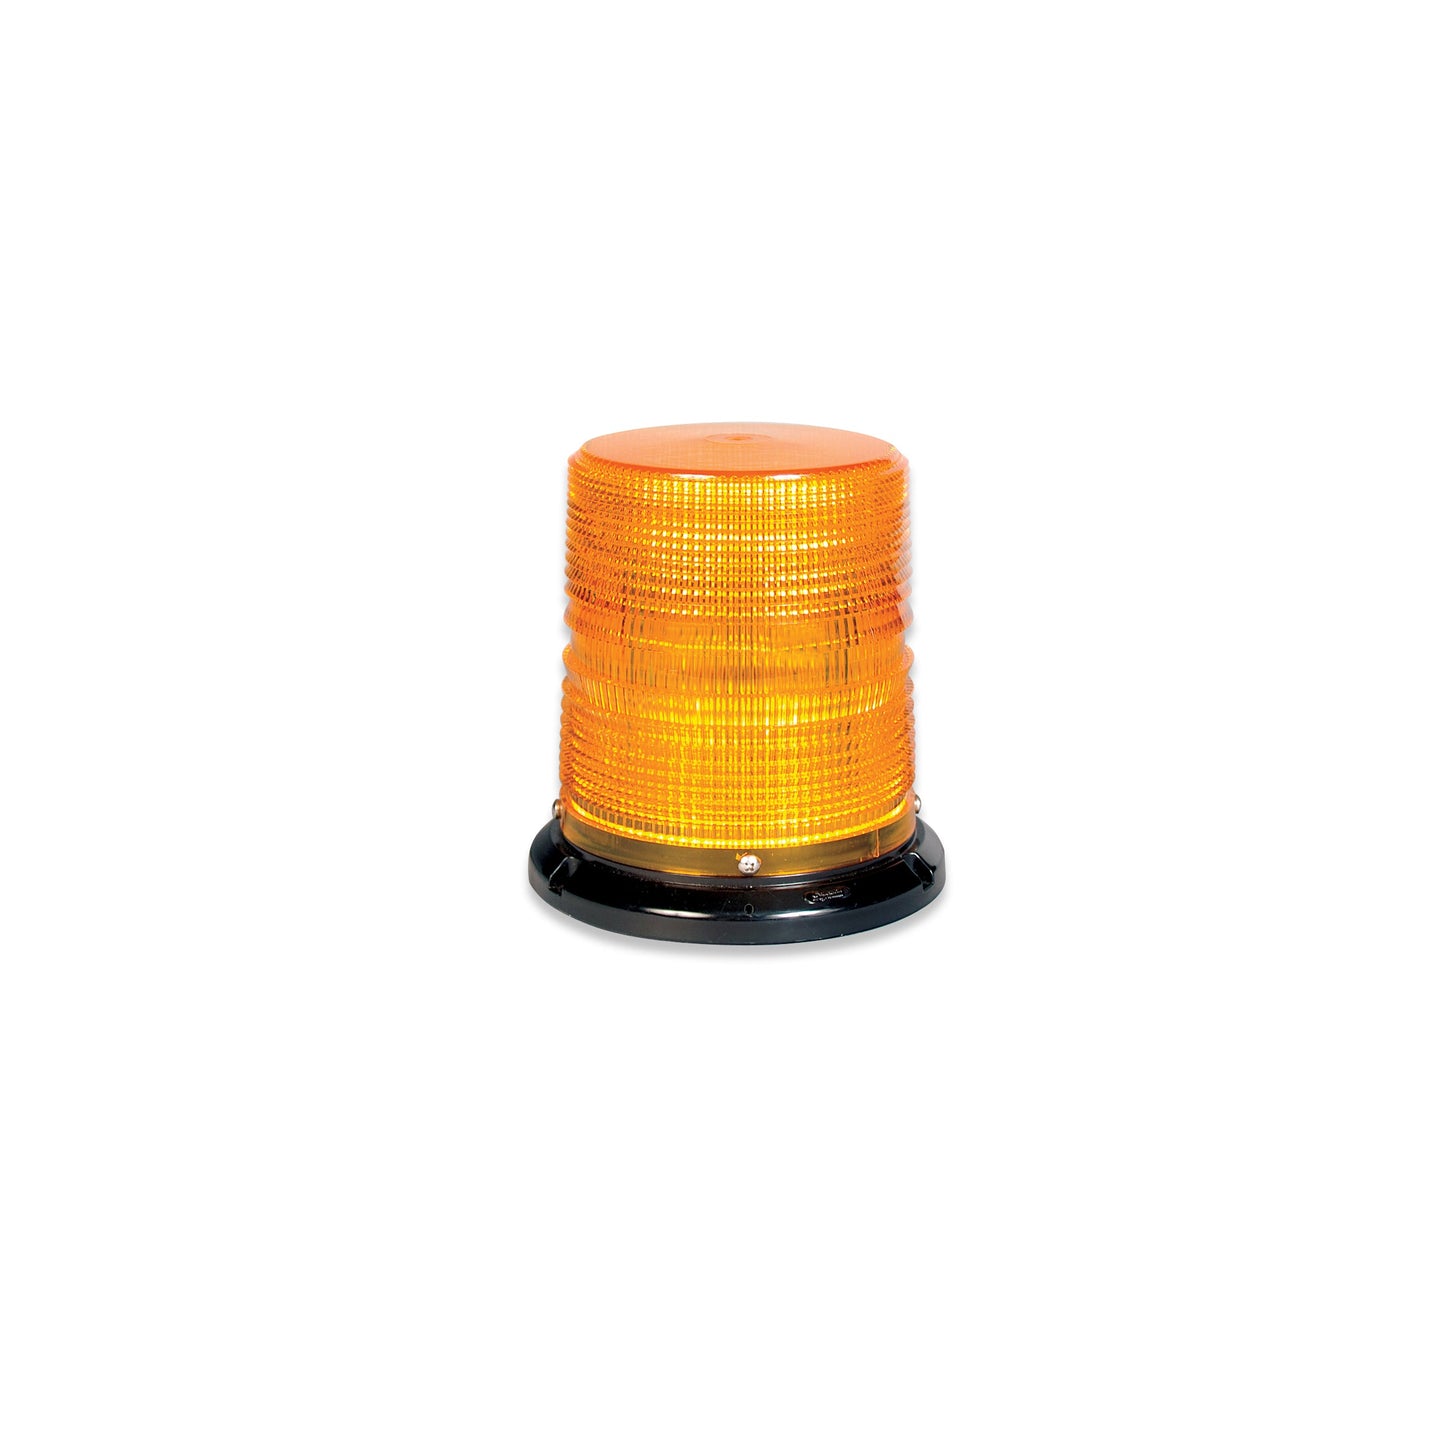 Soundoff Signal ELB45BCH0AC 4500 Series Led Beacon, 10-30V, Sae J845 Class 1 - Flat/Pipe Mount, 6" Clear Dome/ Amber Leds